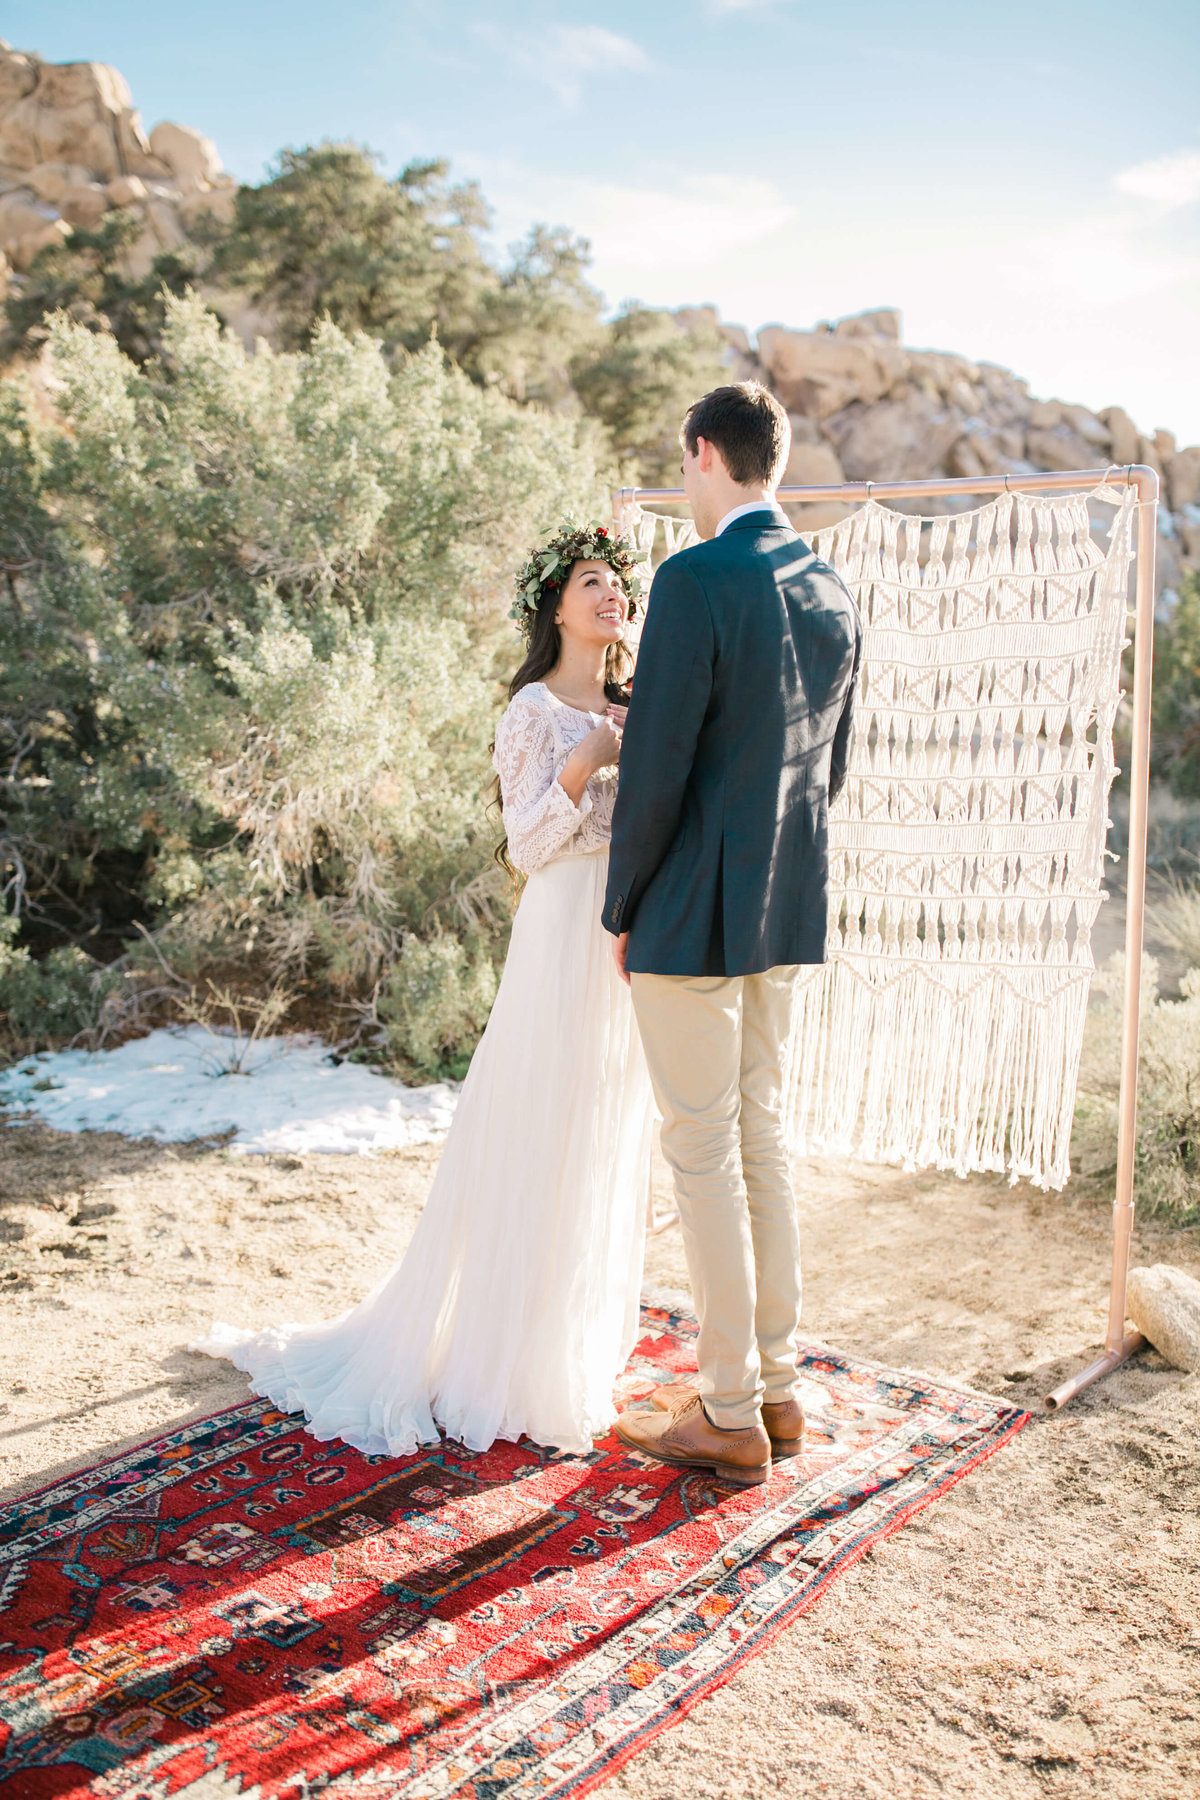 during their joshua tree elopement ceremony the bride looks up at her groom, smiling